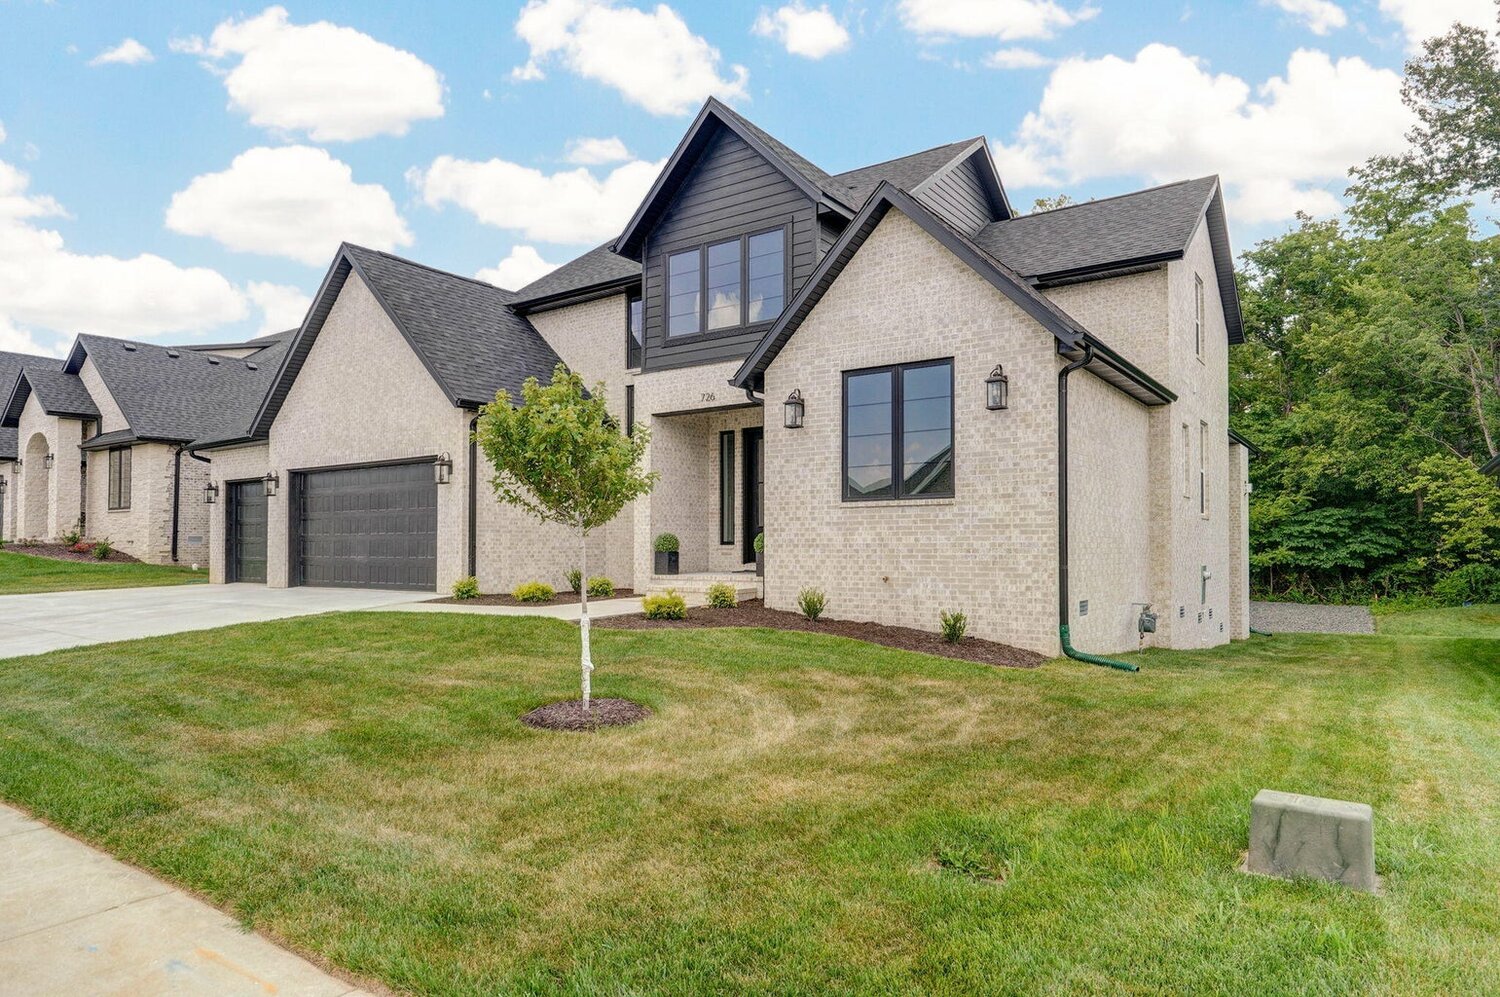 726 S. Hickory Drive
$715,000
Bedrooms: 5
Bathrooms: 4
Listing firm: Alpha Realty MO LLC